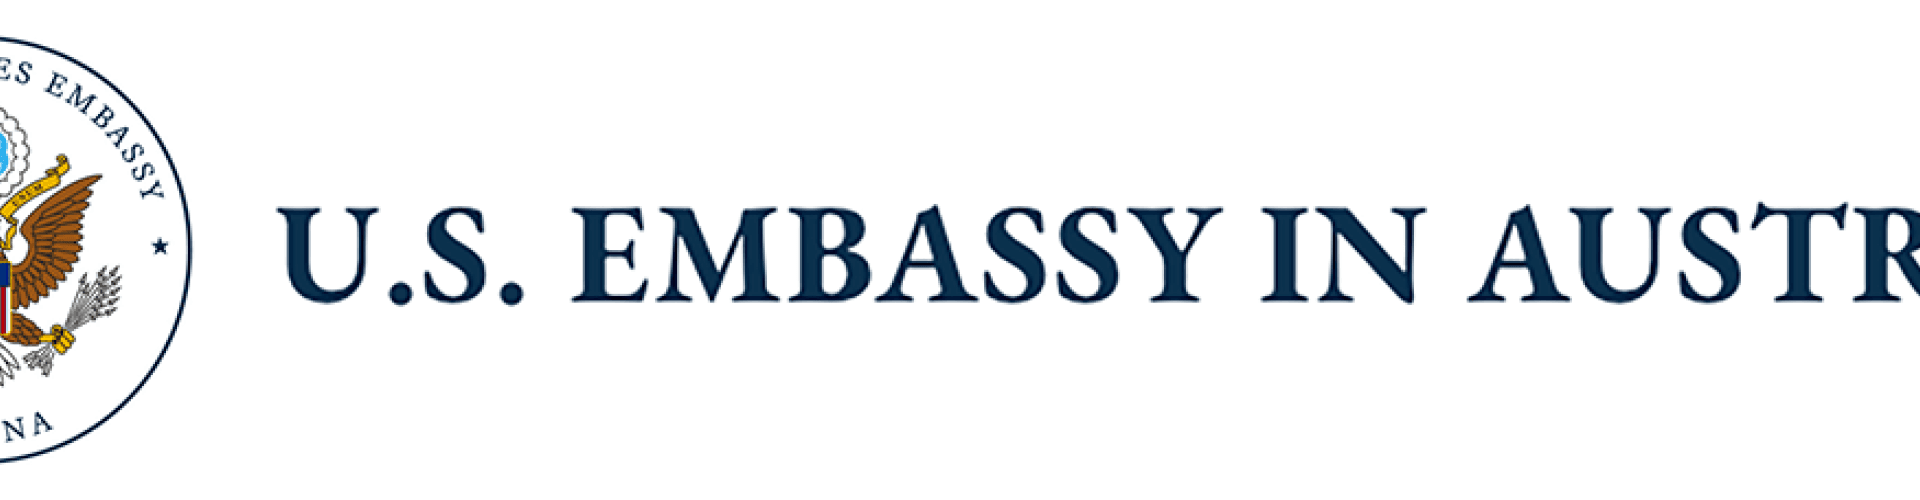 AMERICAN EMBASSY cover